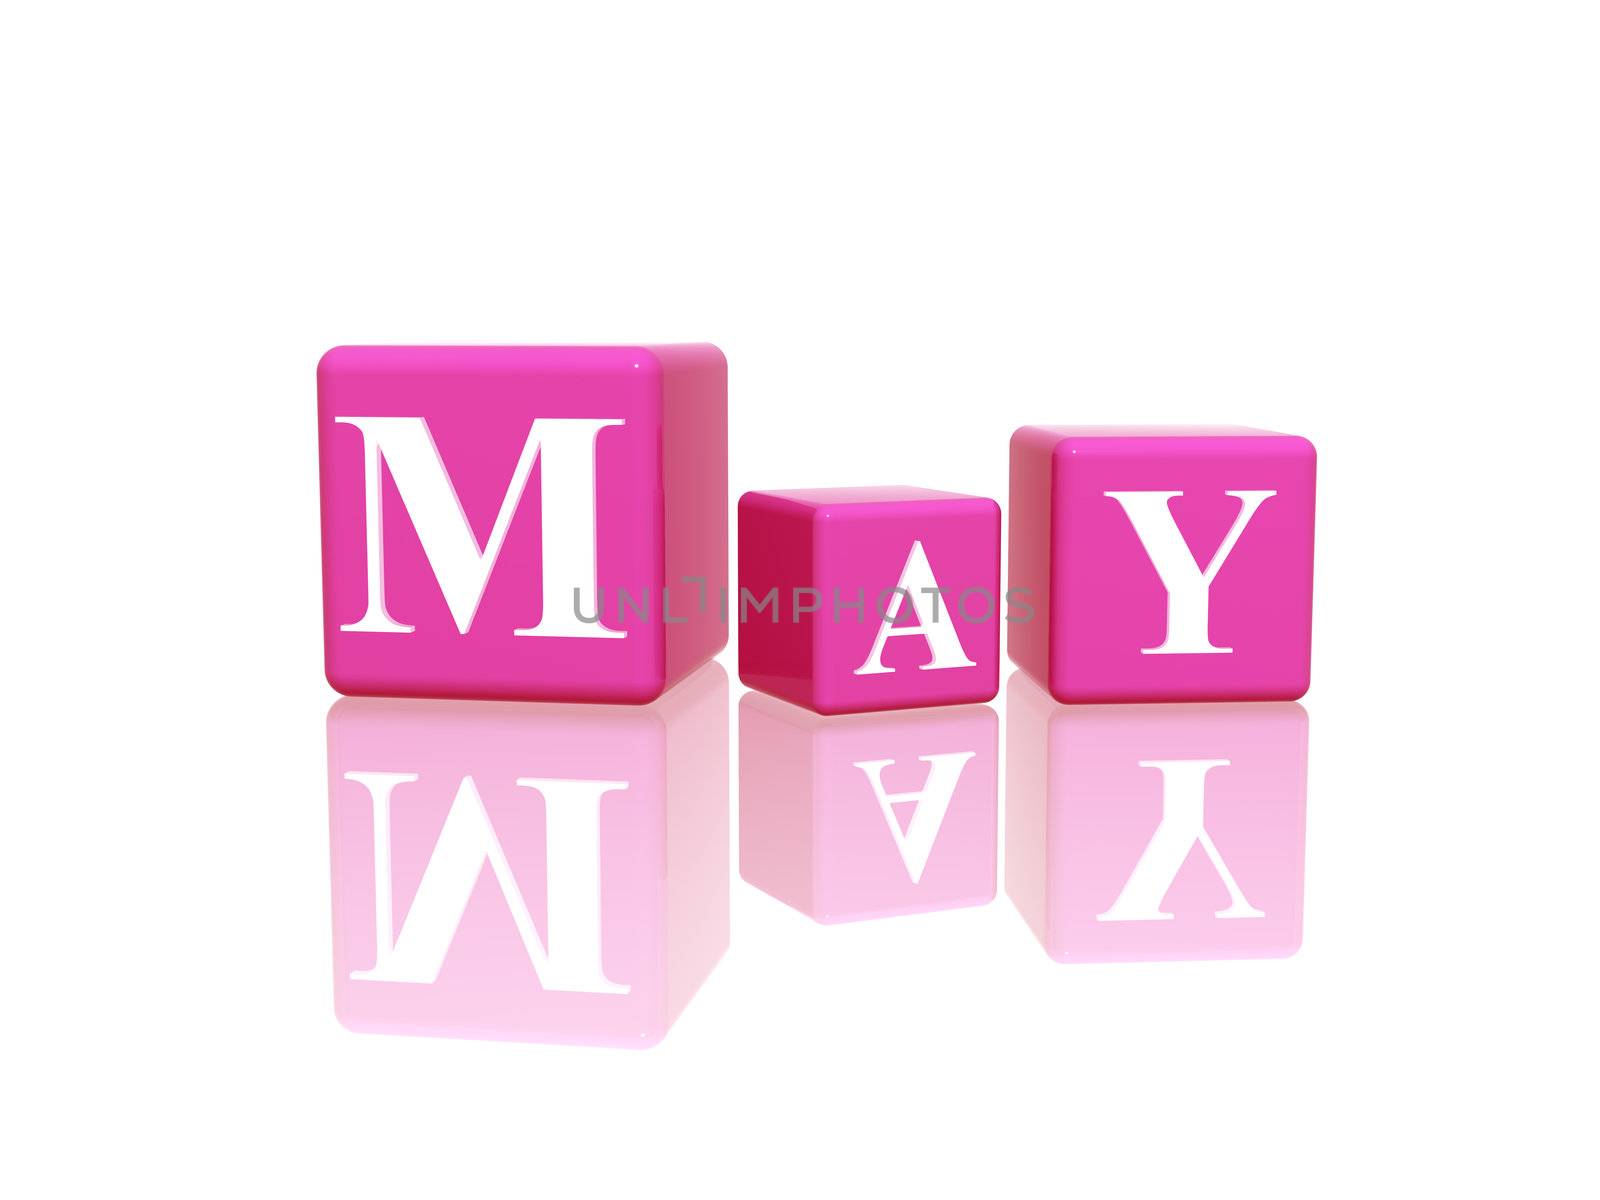 may in 3d cubes by marinini